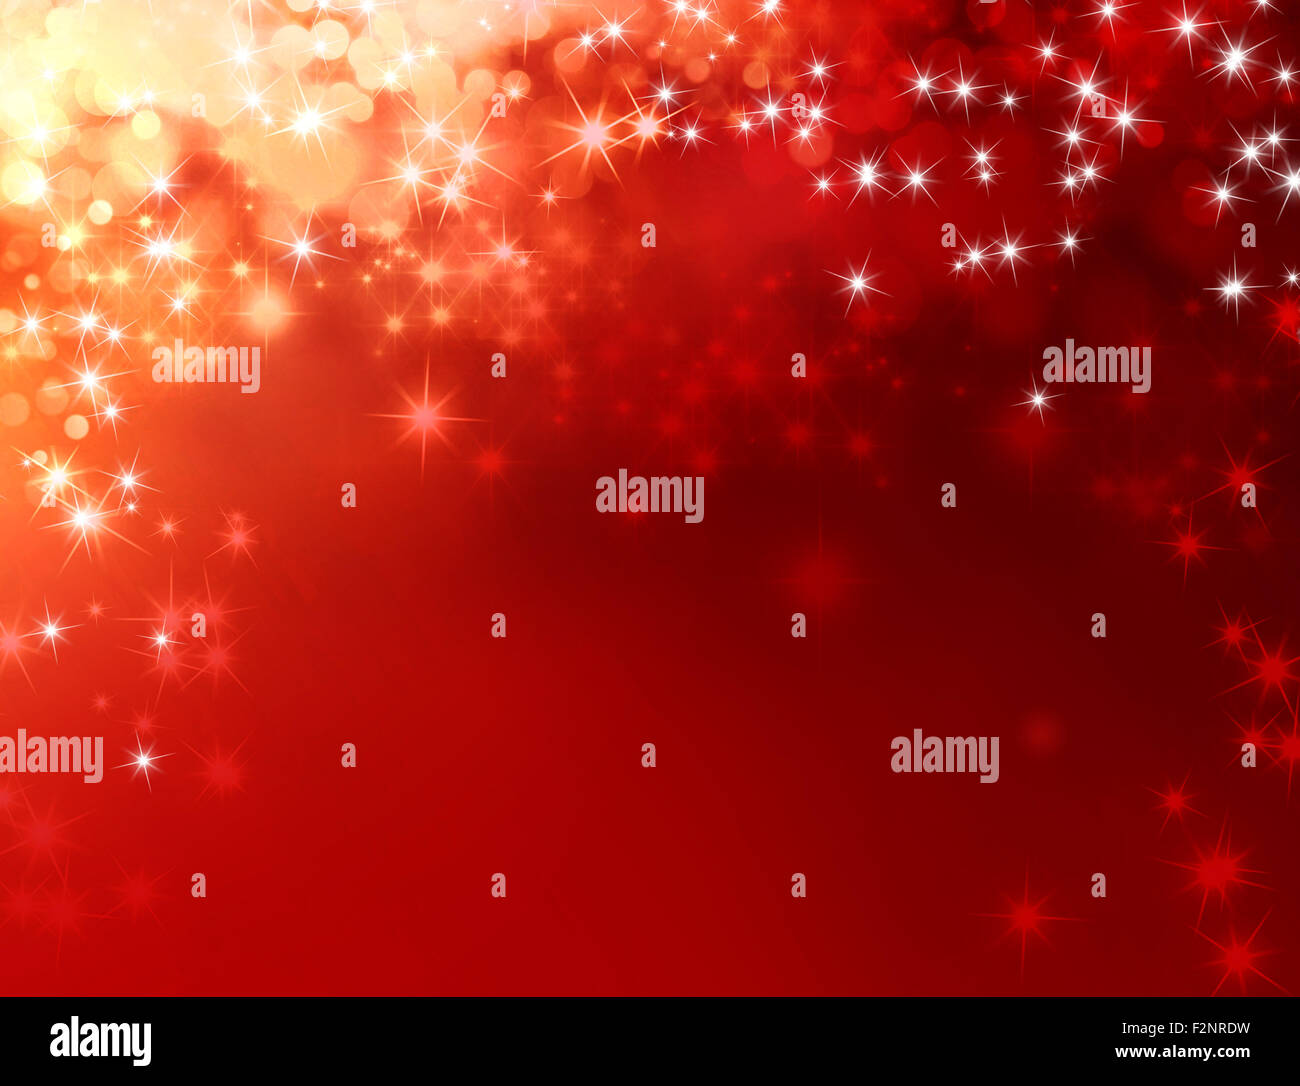 Shiny red background with starlight raining down Stock Photo